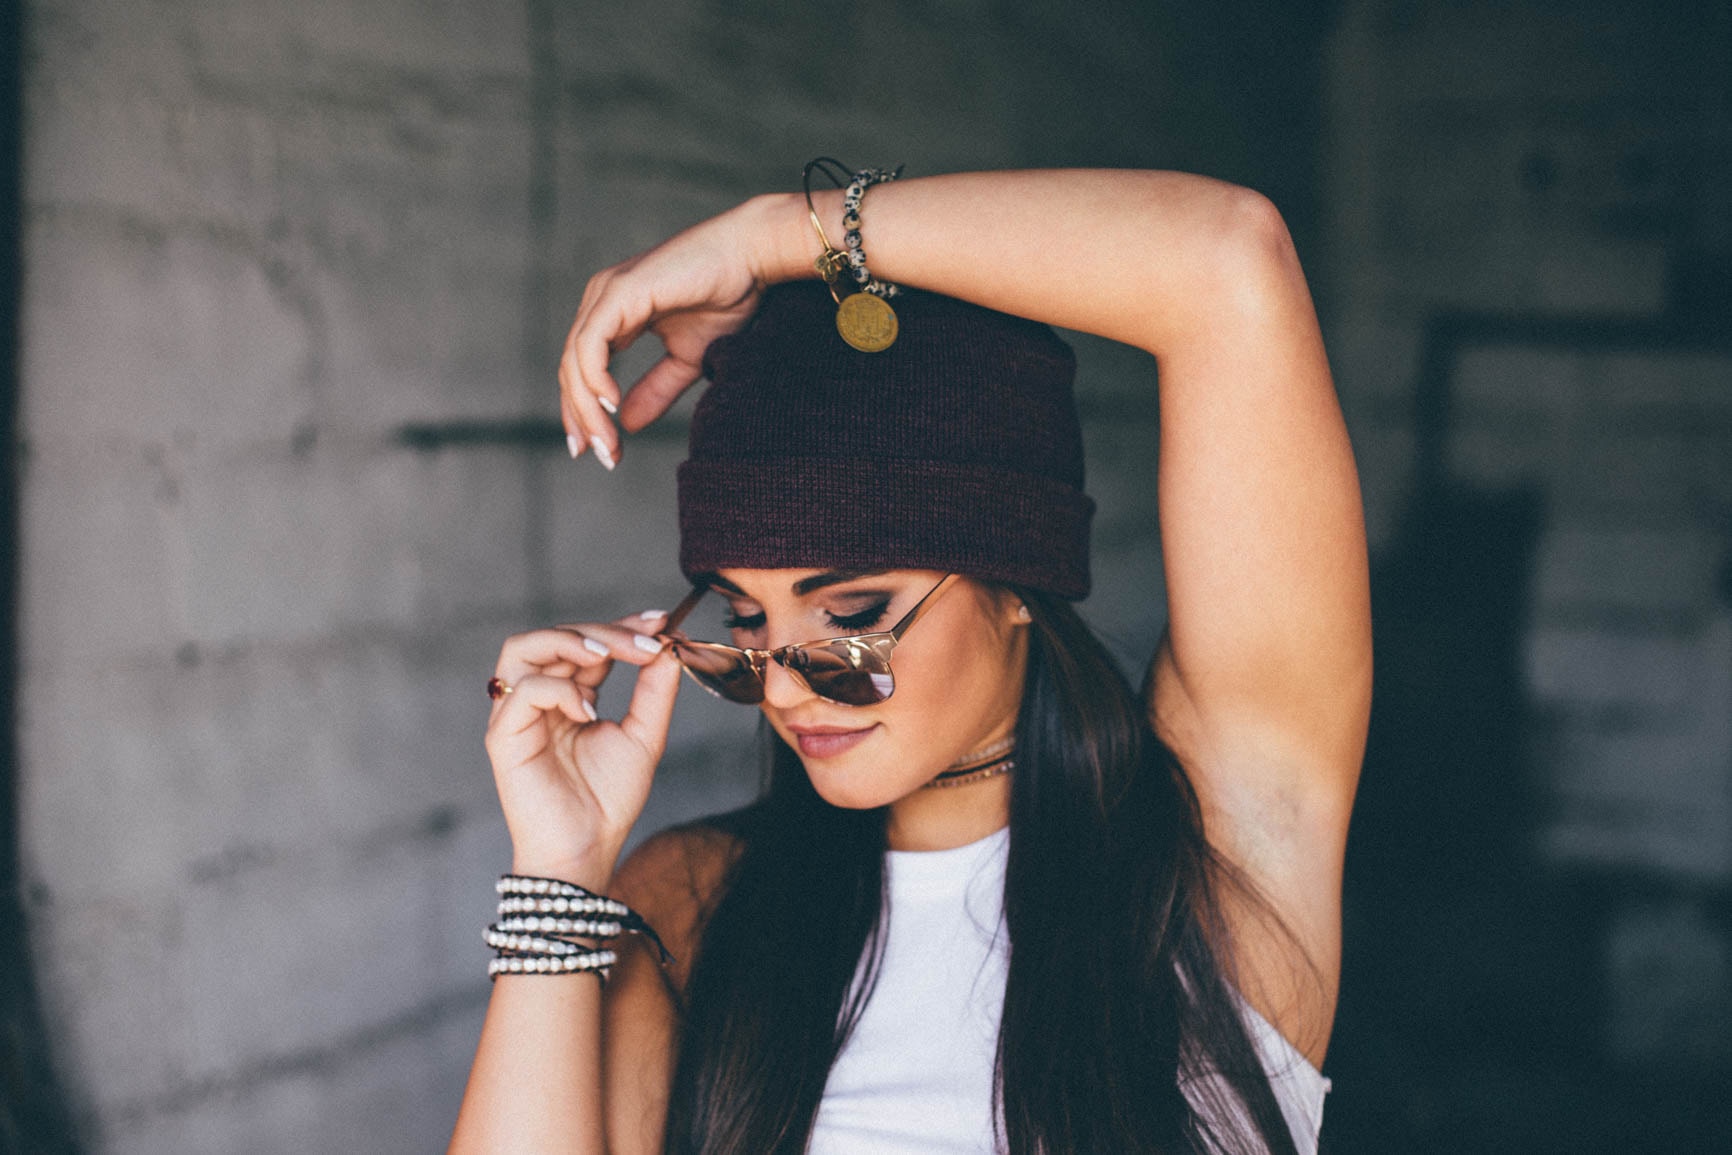 Woman posing with her sunglasses. | Source: Unsplash